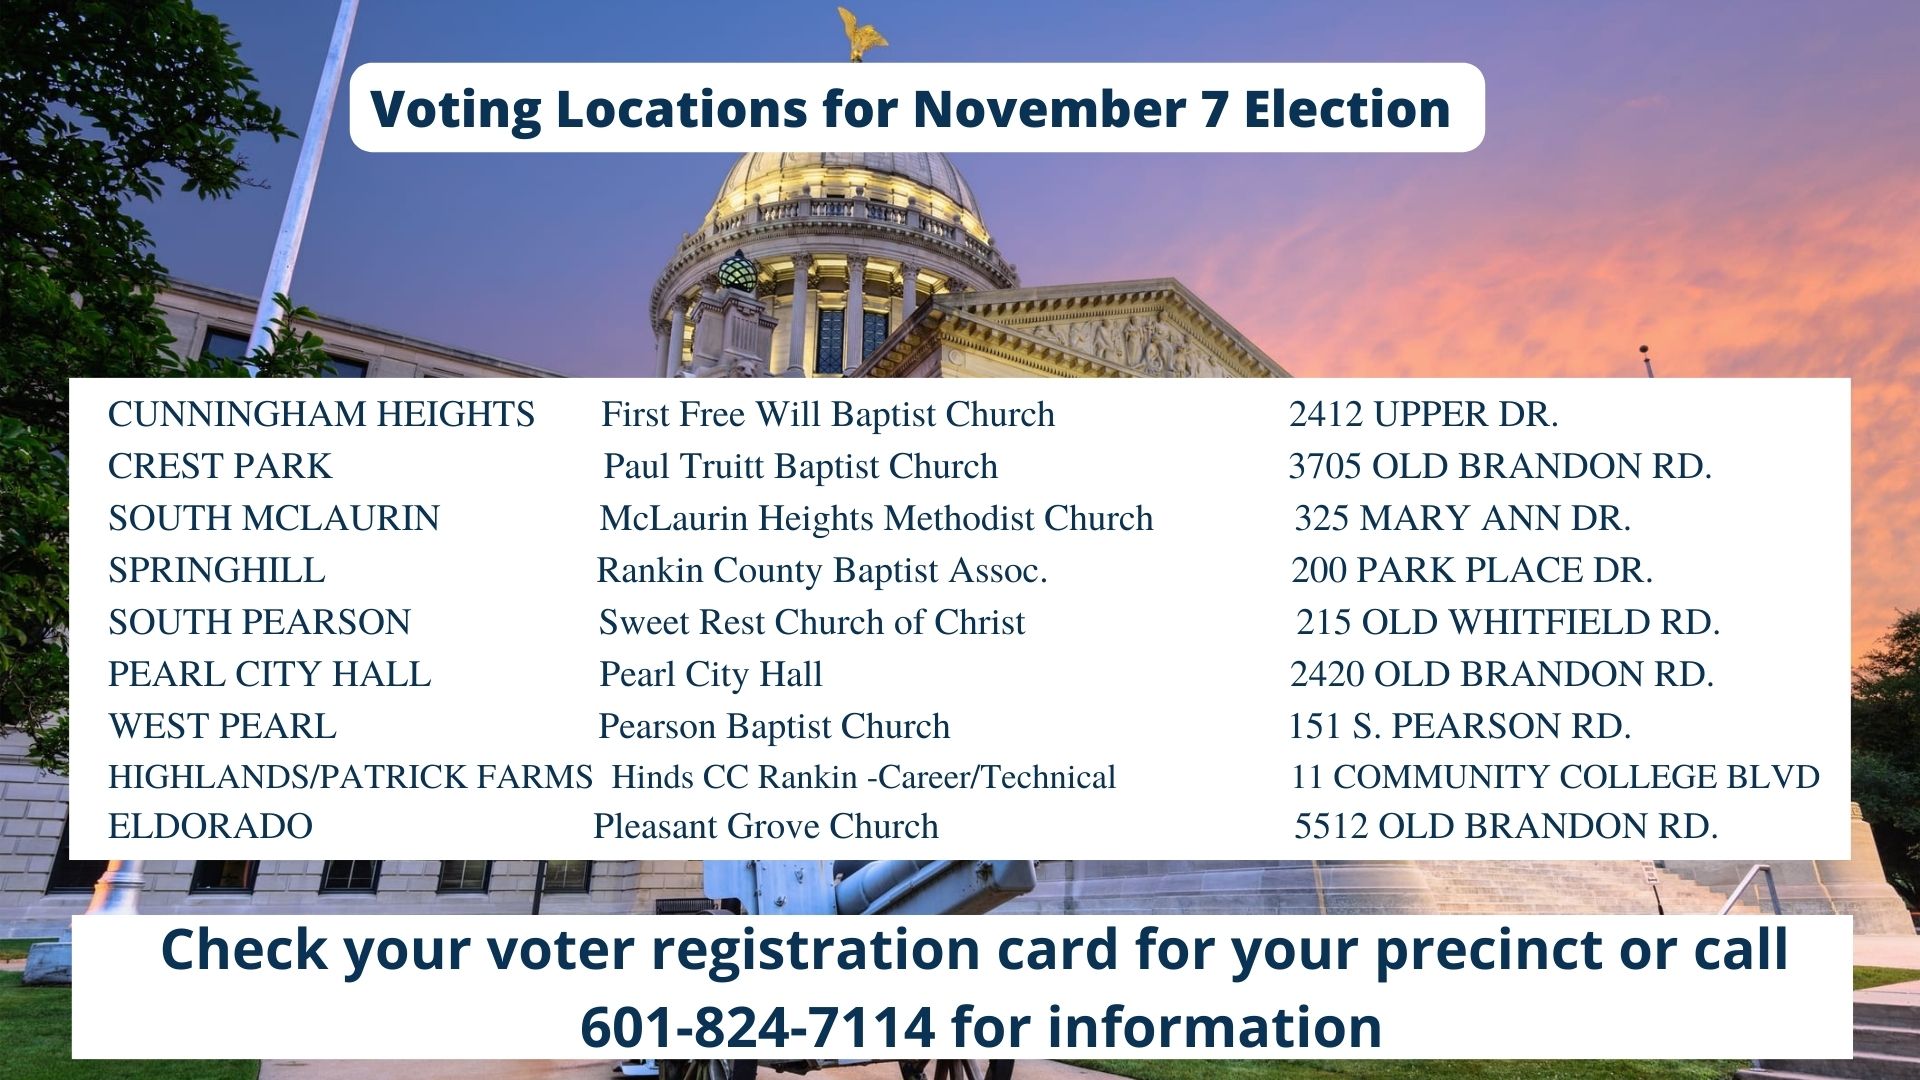 General Election for County and State Offices is Nov. 7